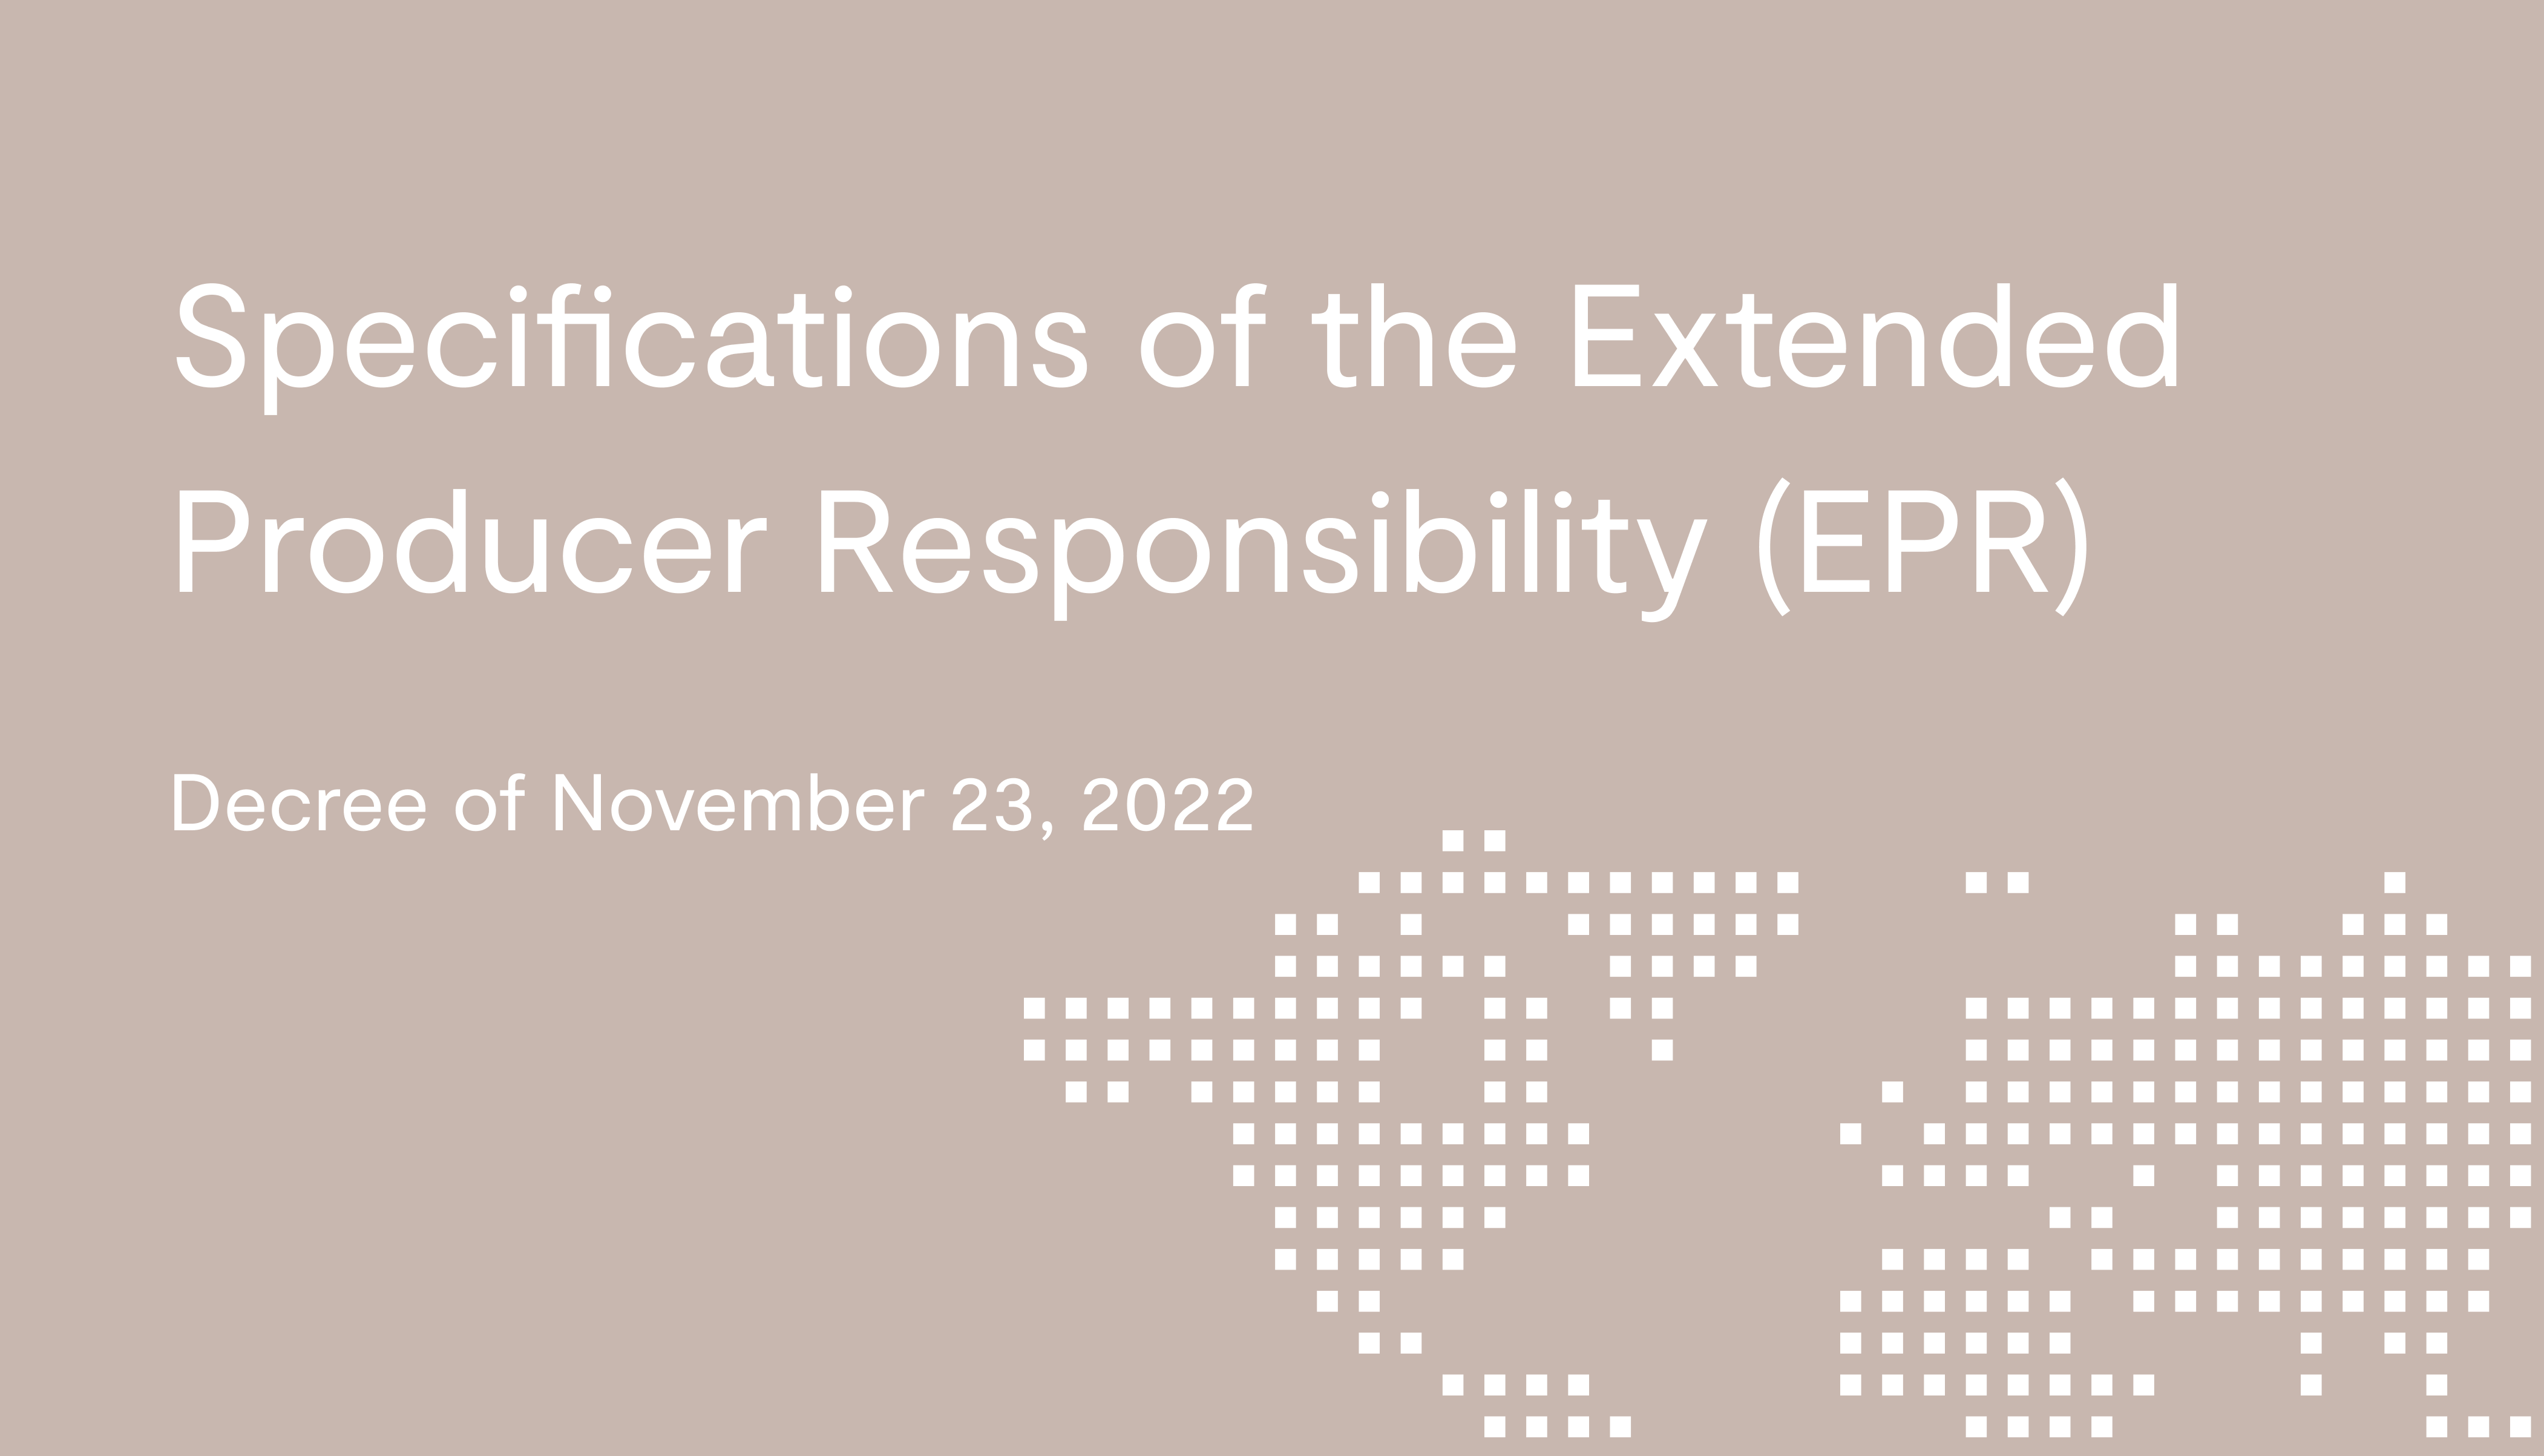 Specifications of the Extended Producer Responsibility (EPR) (Decree of November 23, 2022)